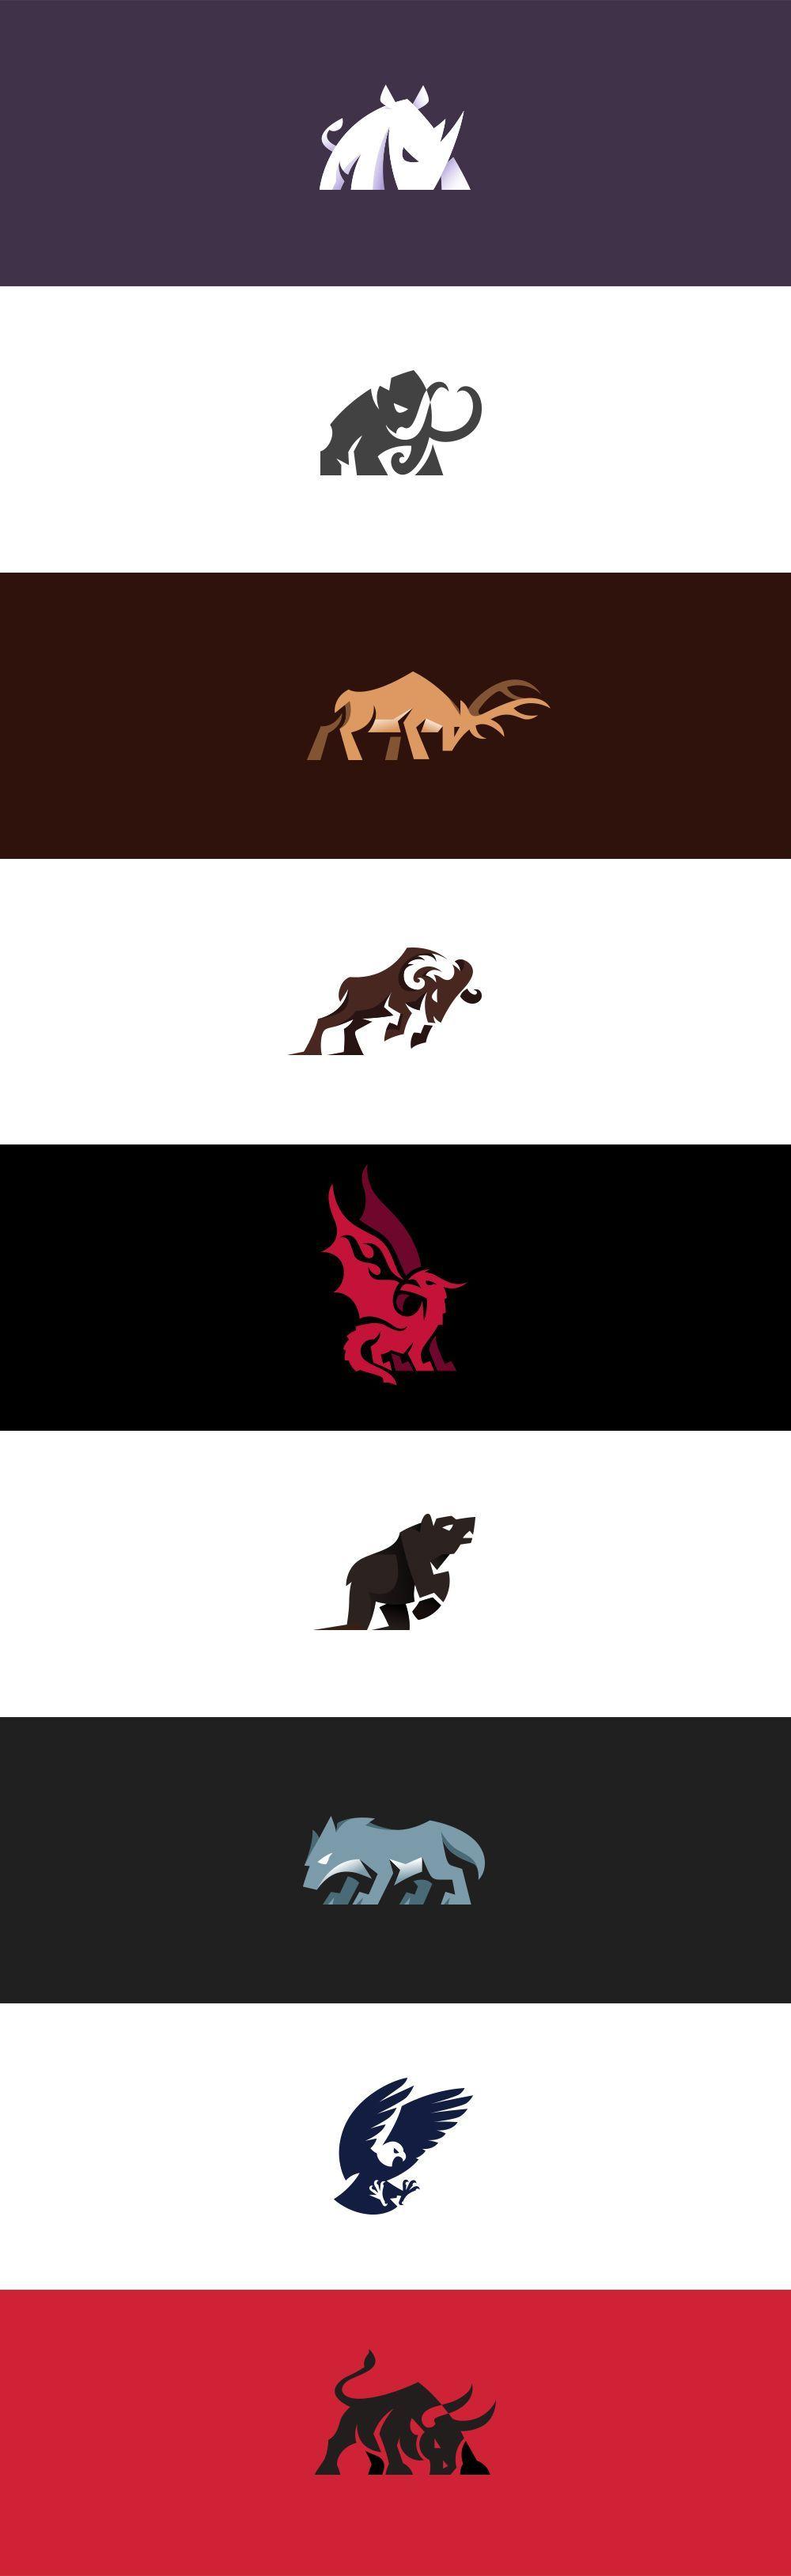 Cool Simple Wolf Logo - Aggressive and charging animal logos I made. | Creative | Pinterest ...